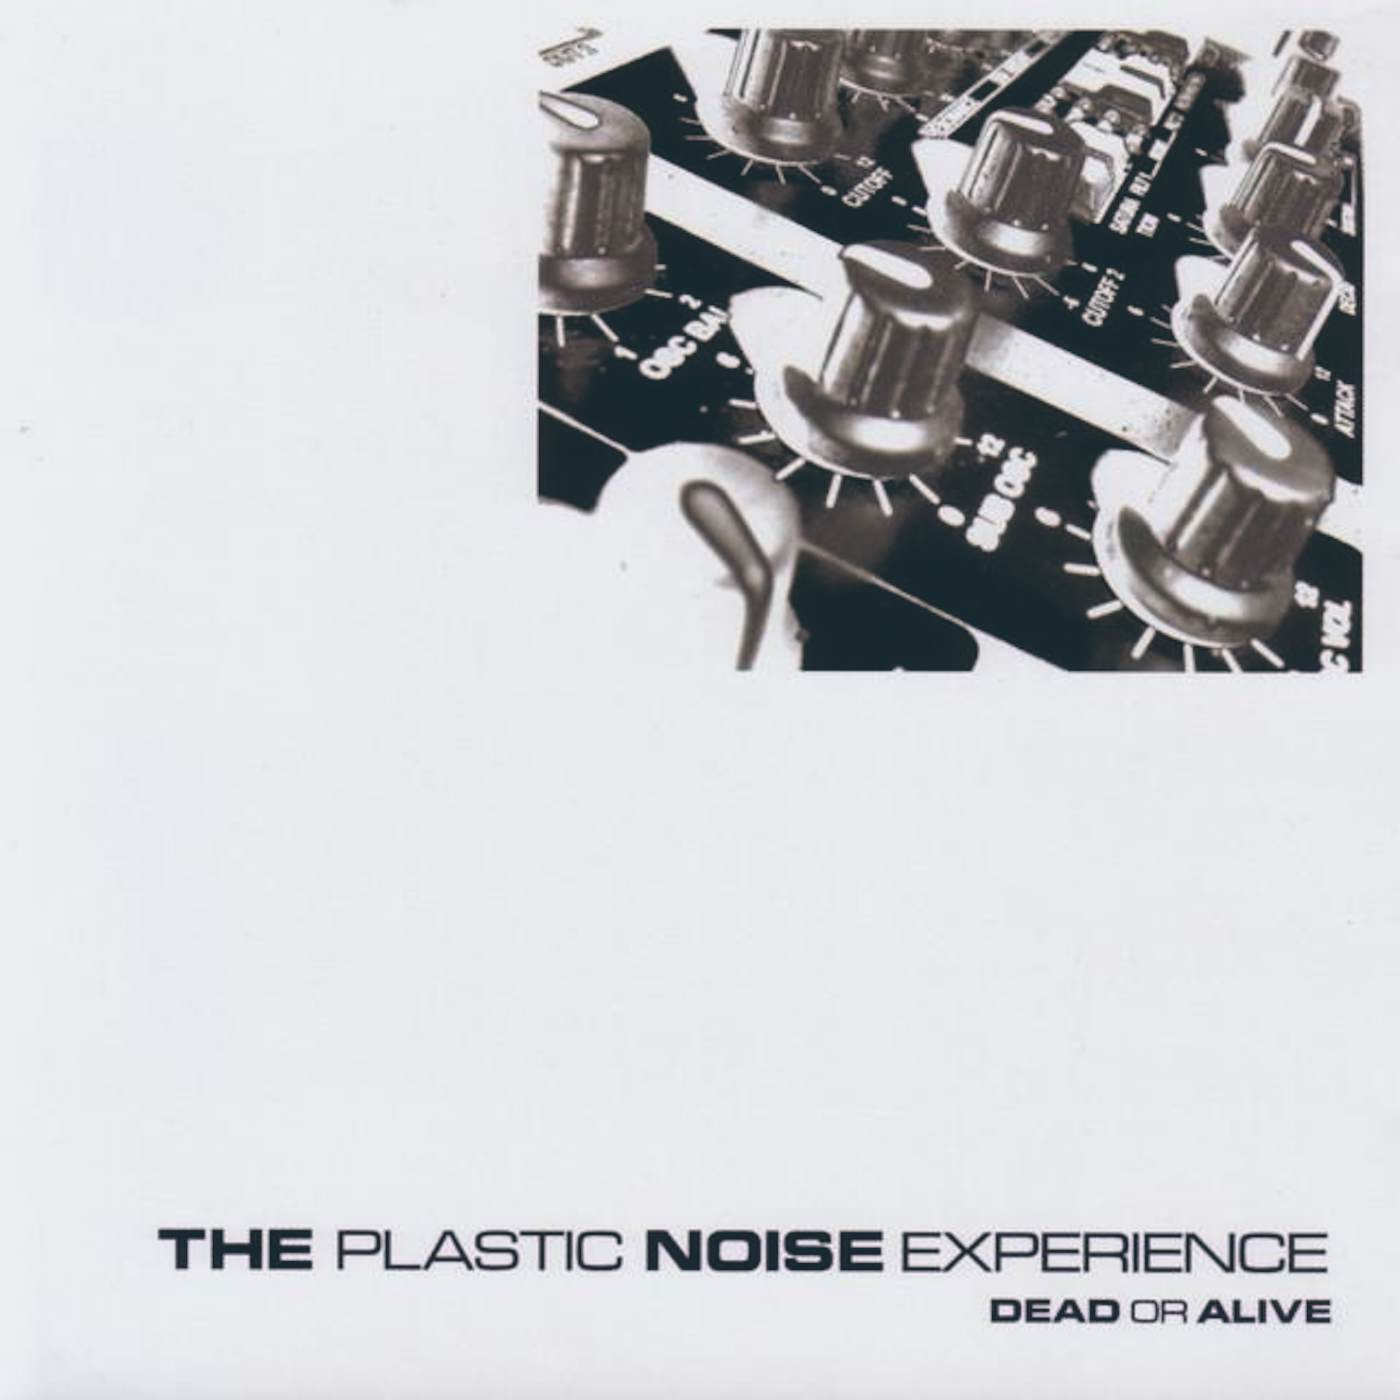 The Plastic Noise Experience